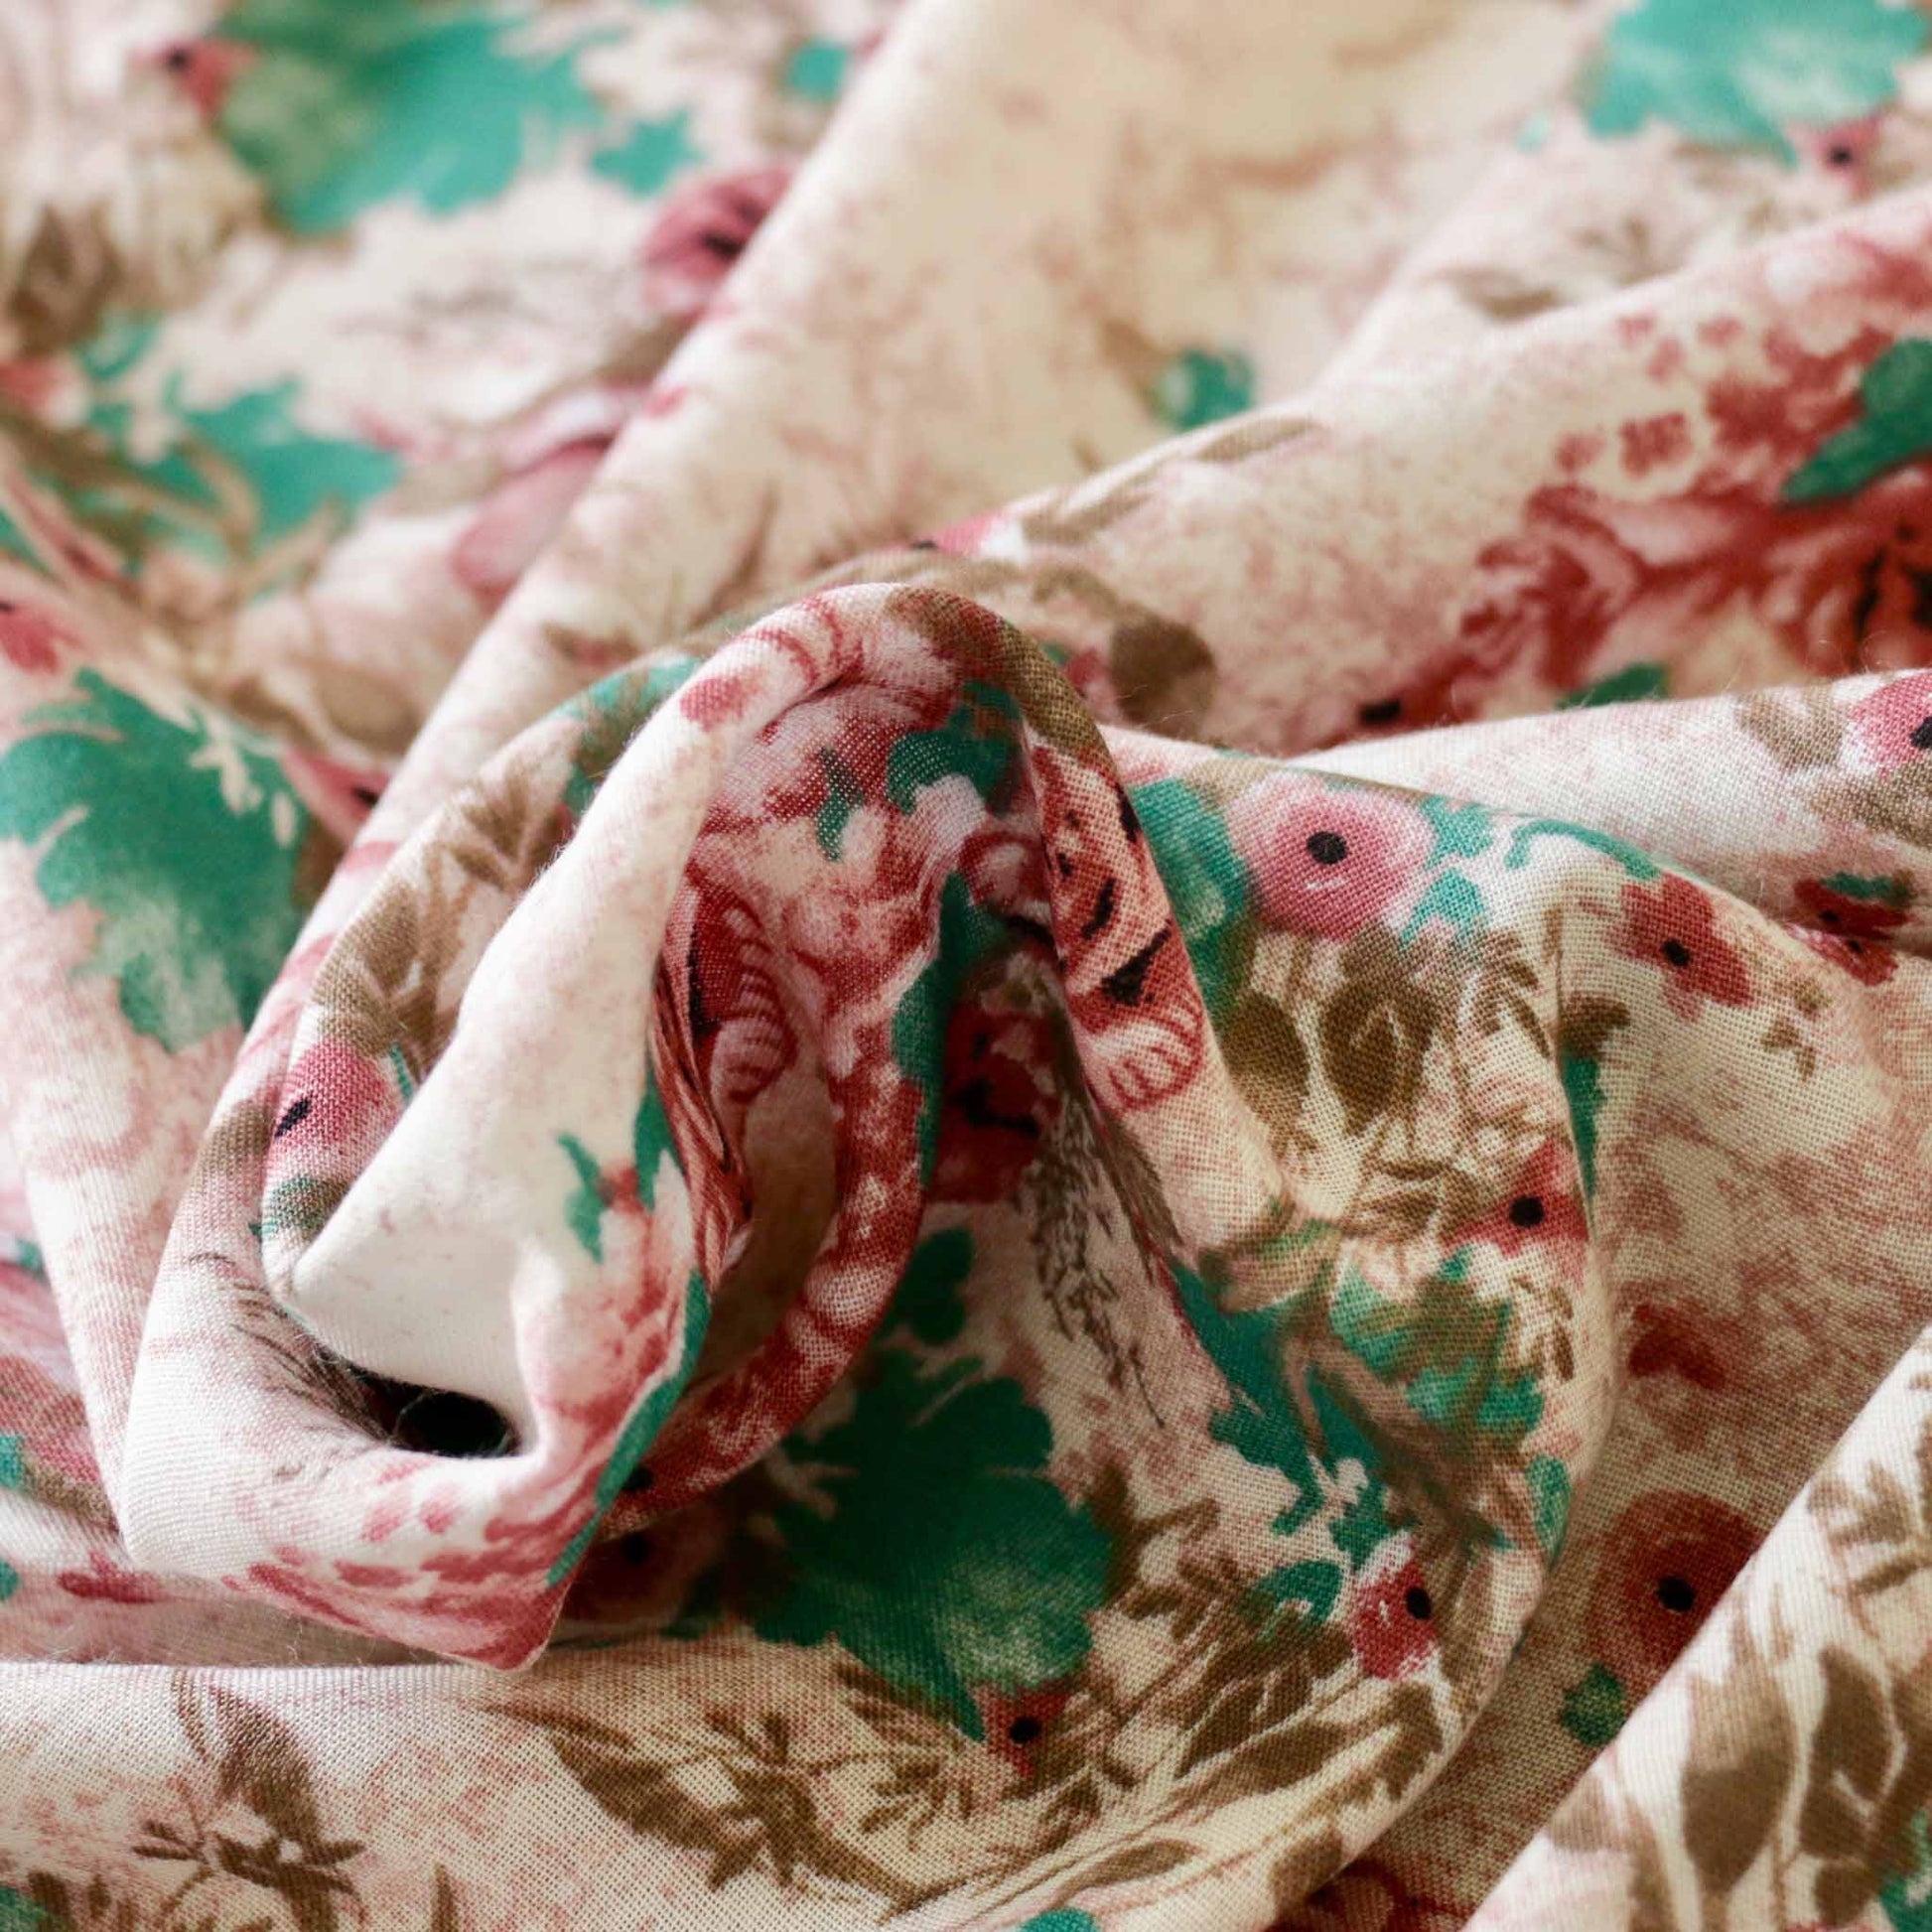 classical floral pattern in turquoise on dusty pink viscose challis dressmaking rayon fabric